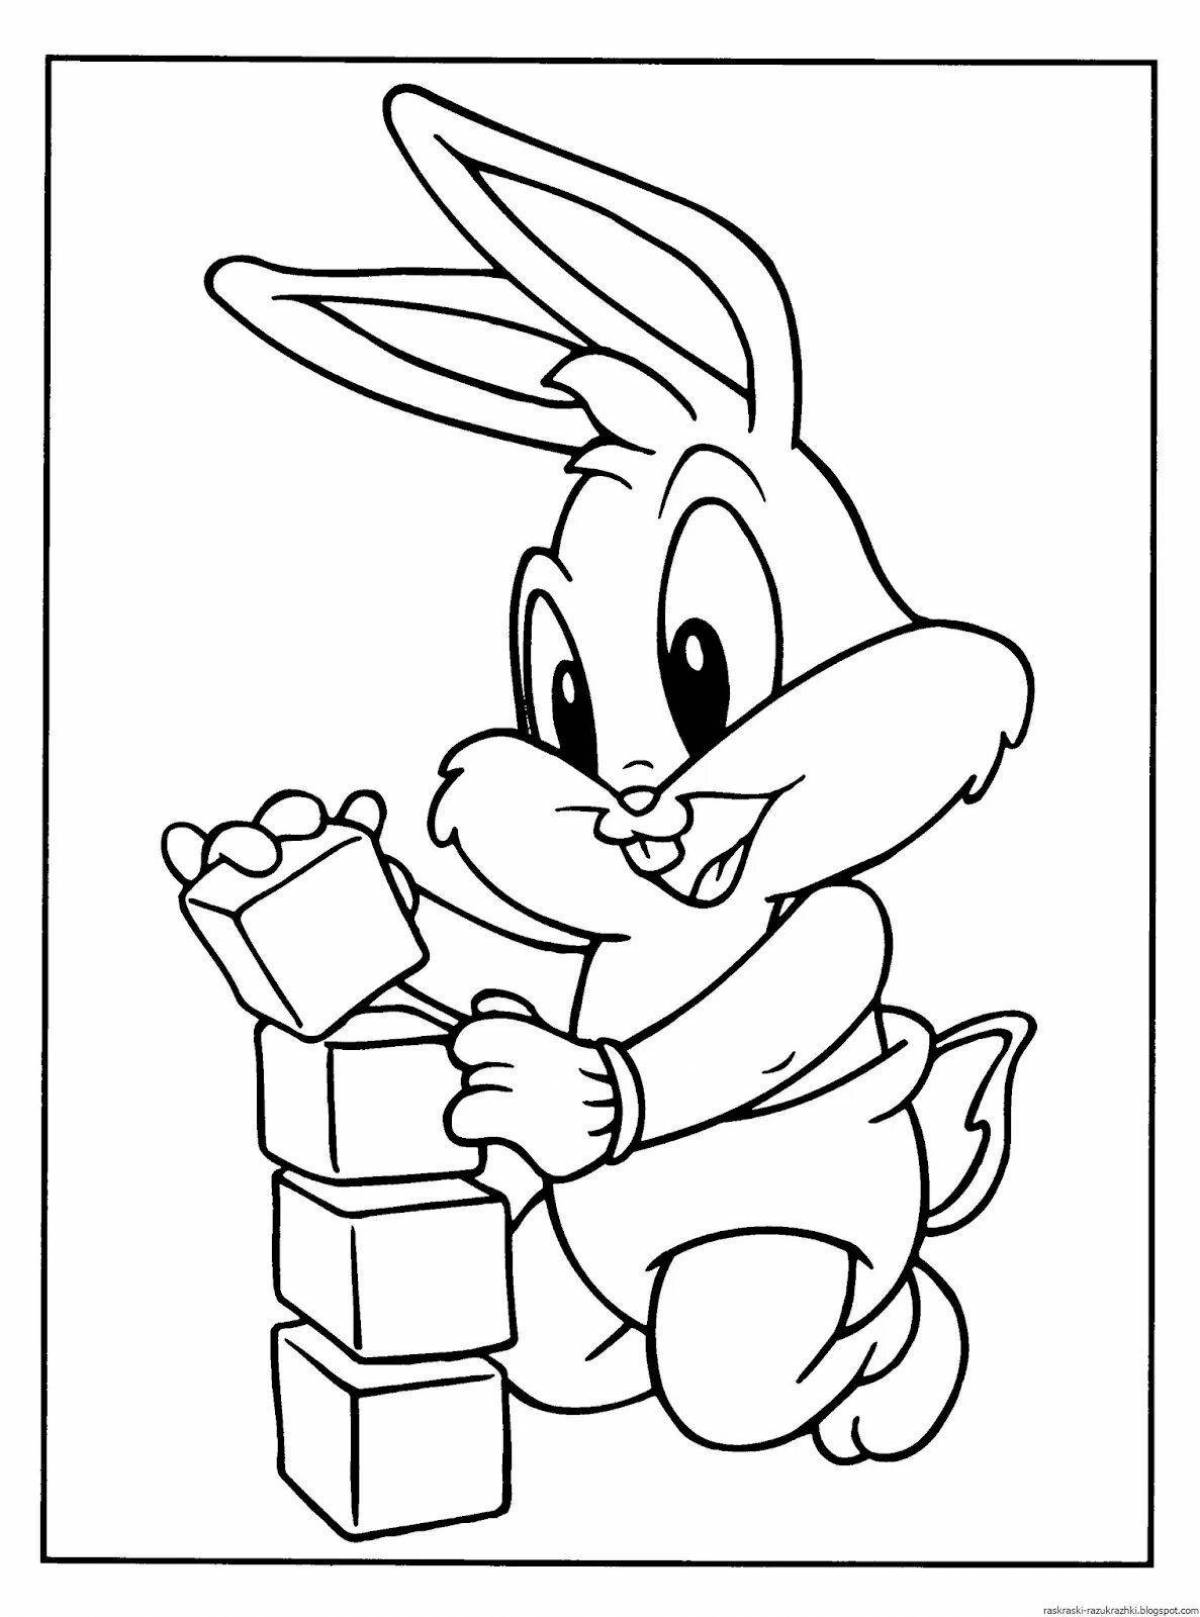 Coloring book with funny cartoon characters for children 4-5 years old